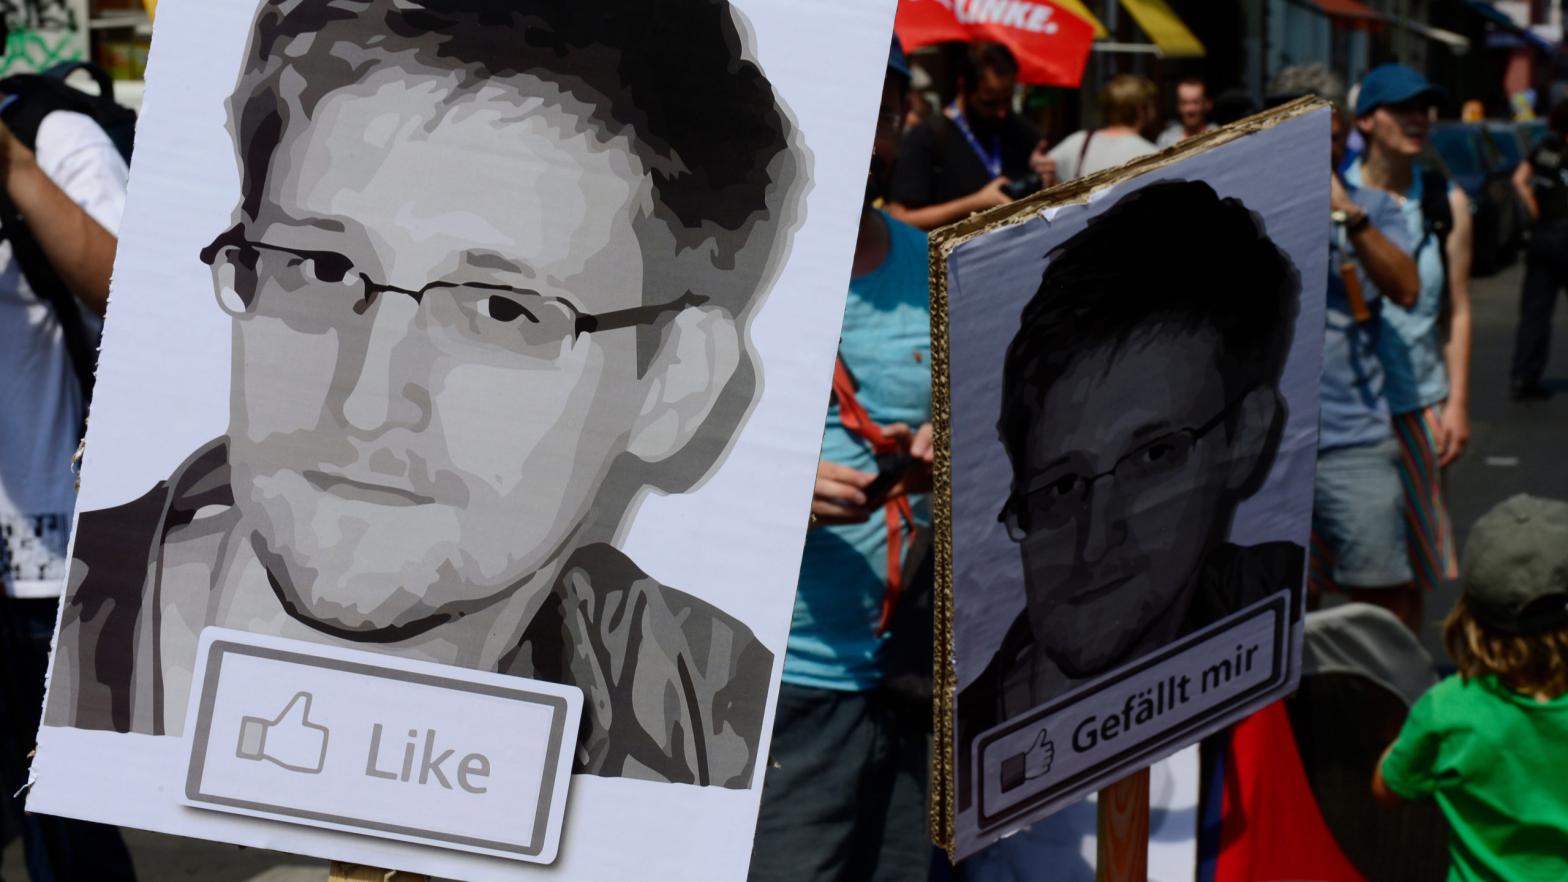 Demonstrators hold placards featuring an image of former U.S. intelligence contractor Edward Snowden as they take part in a protest the NSA's surveillance in Germany on July 27, 2013.  (Photo: John Macdougall/AFP, Getty Images)